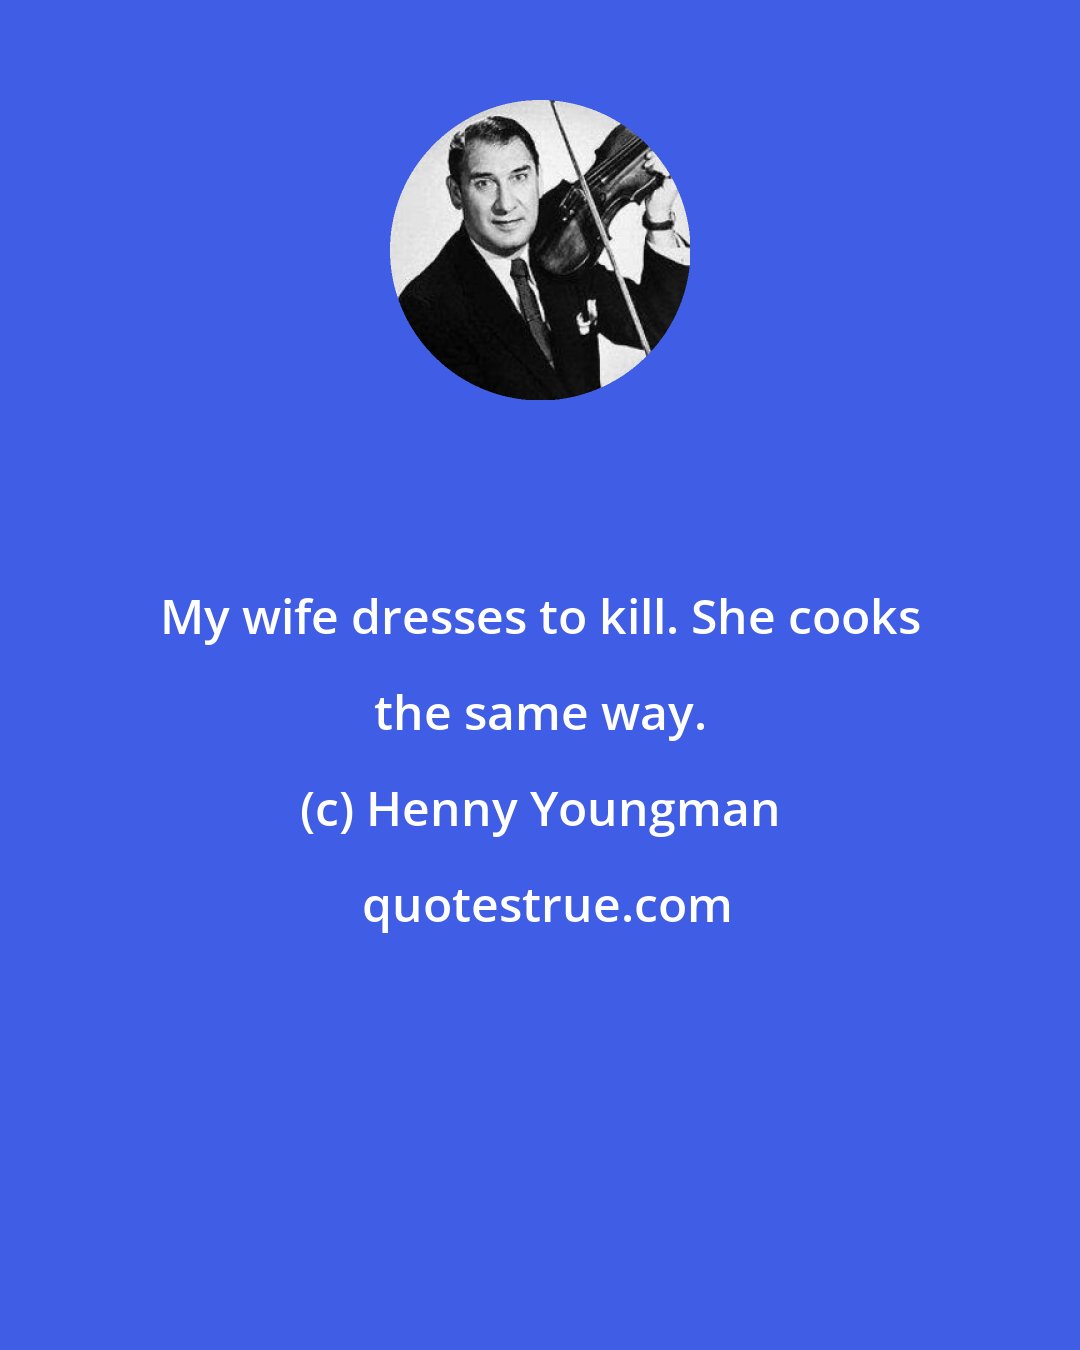 Henny Youngman: My wife dresses to kill. She cooks the same way.